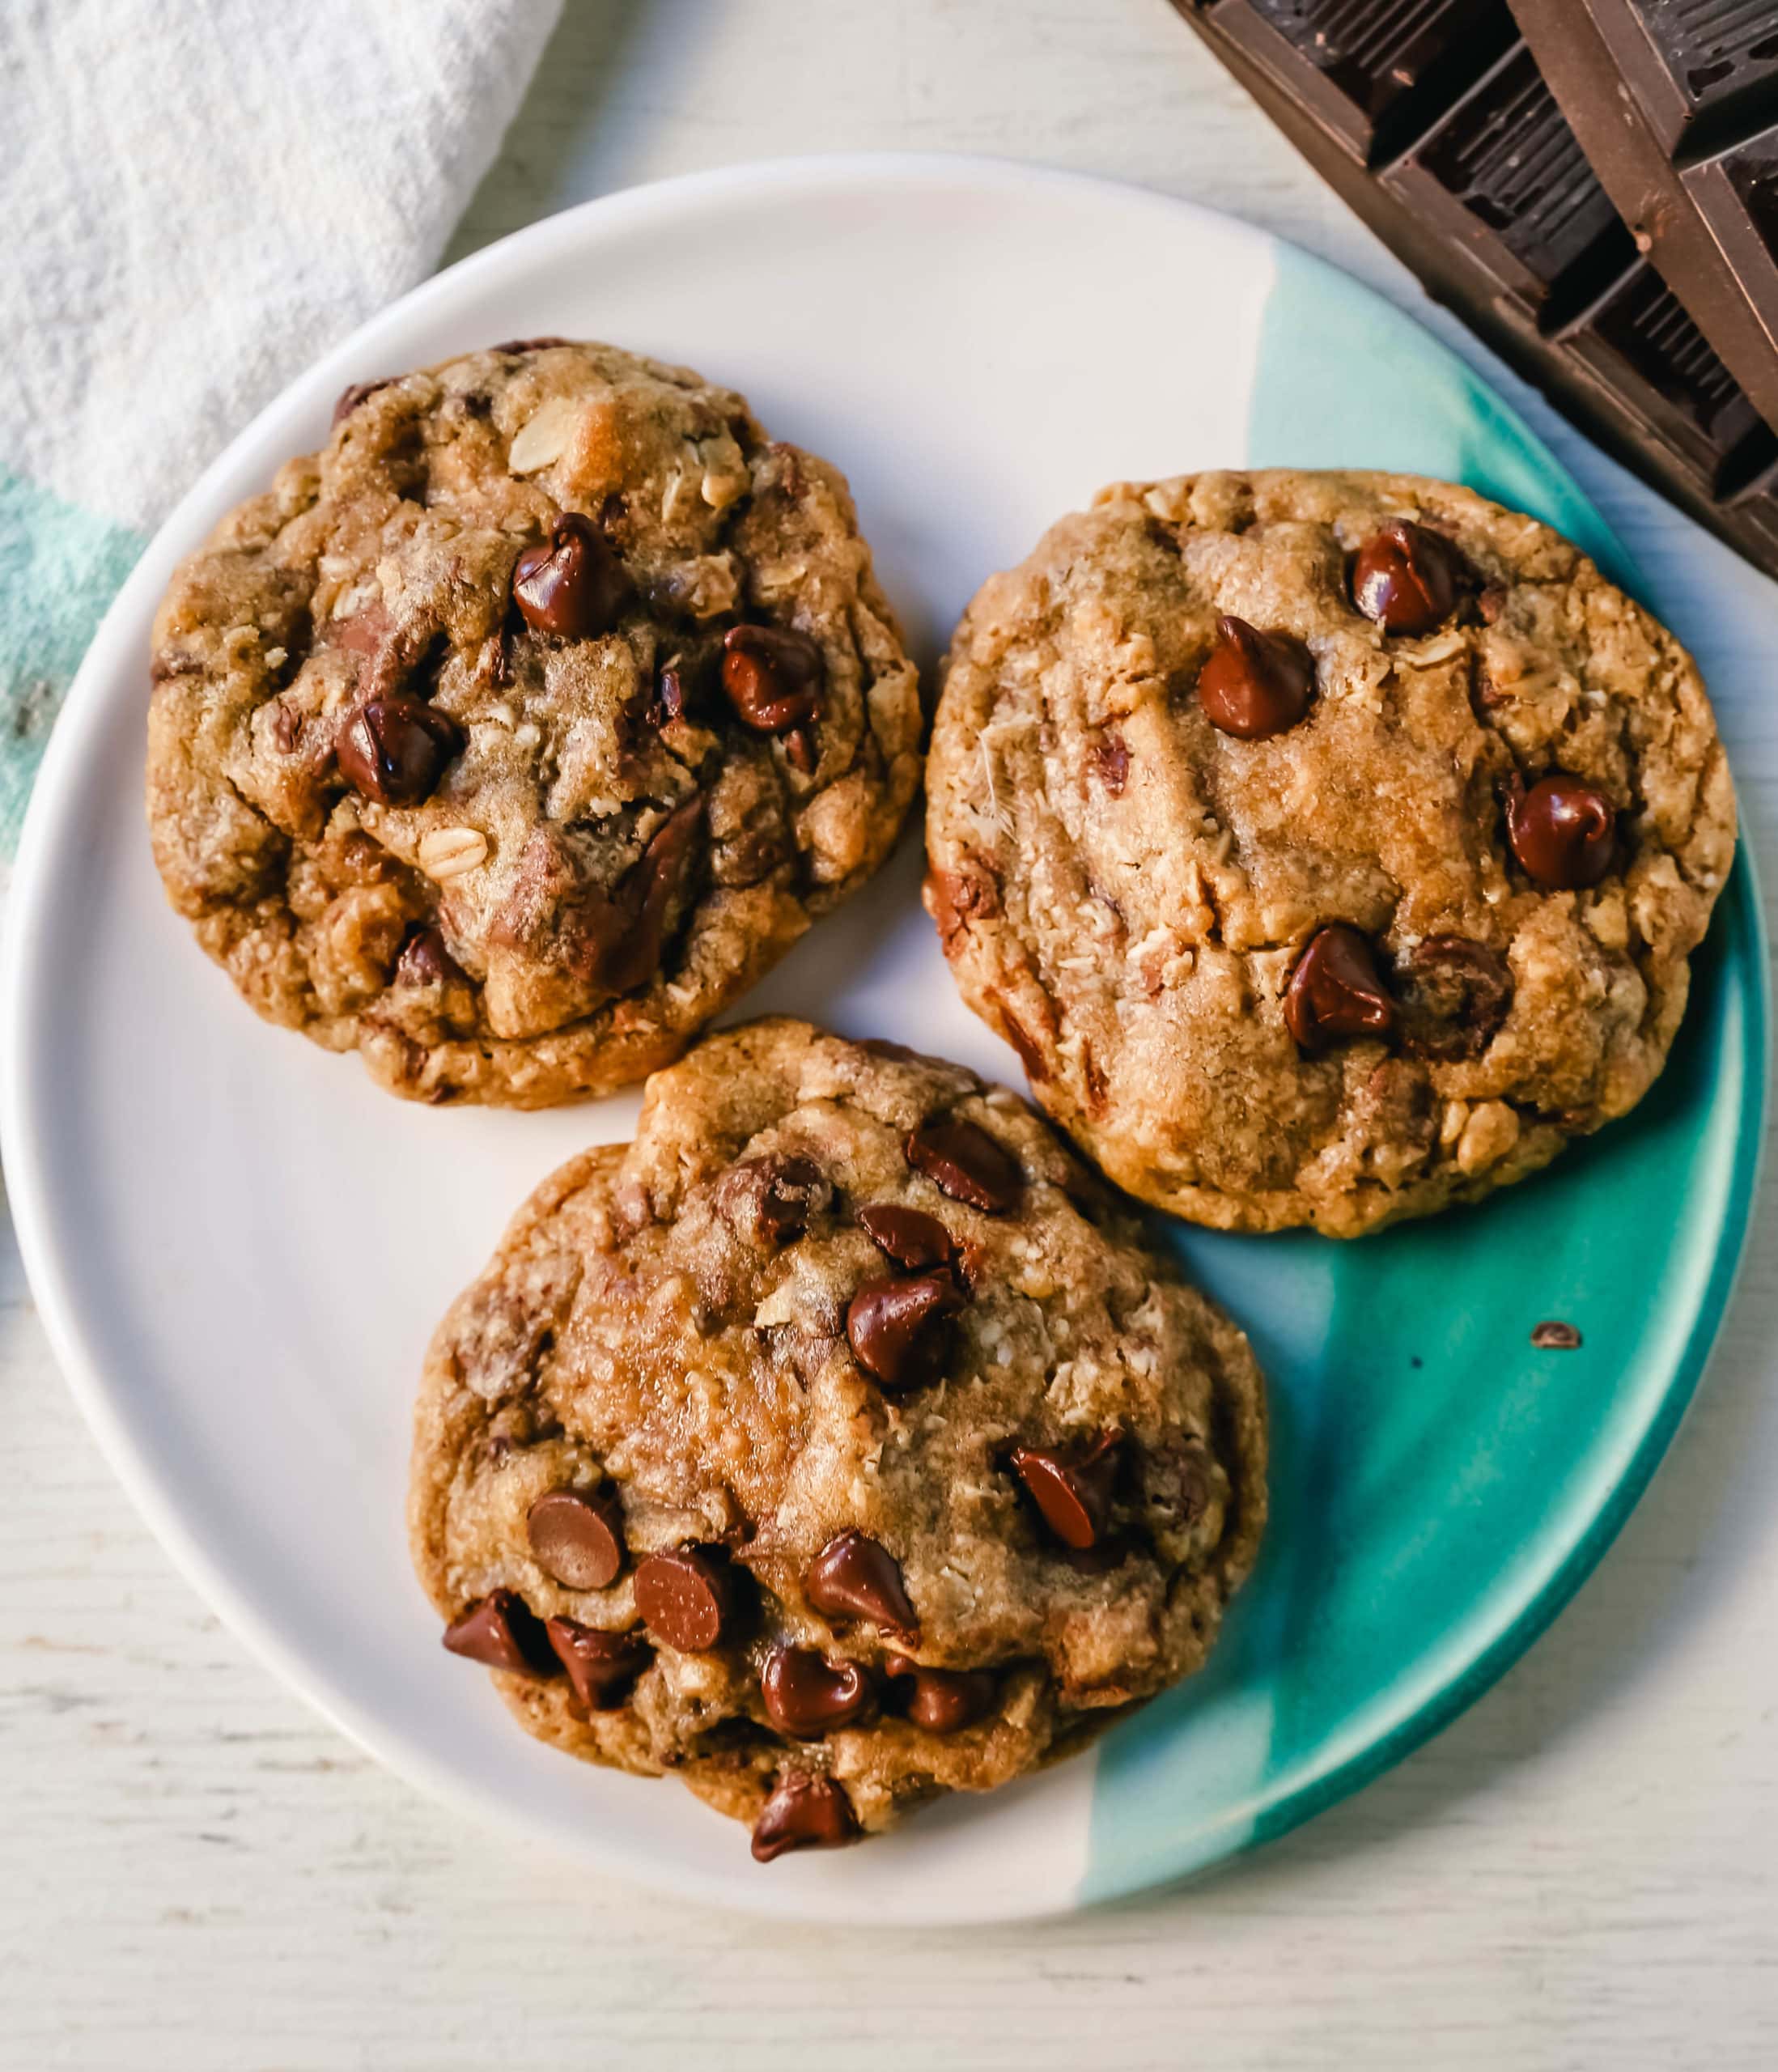 Oatmeal Chocolate Chip Cookies Soft, chewy oatmeal cookies with chocolate chips. The Best Oatmeal Chocolate Chip Cookie recipe! www.modernhoney.com #cookies #oatmealcookies #oatmealchocolatechipcookies